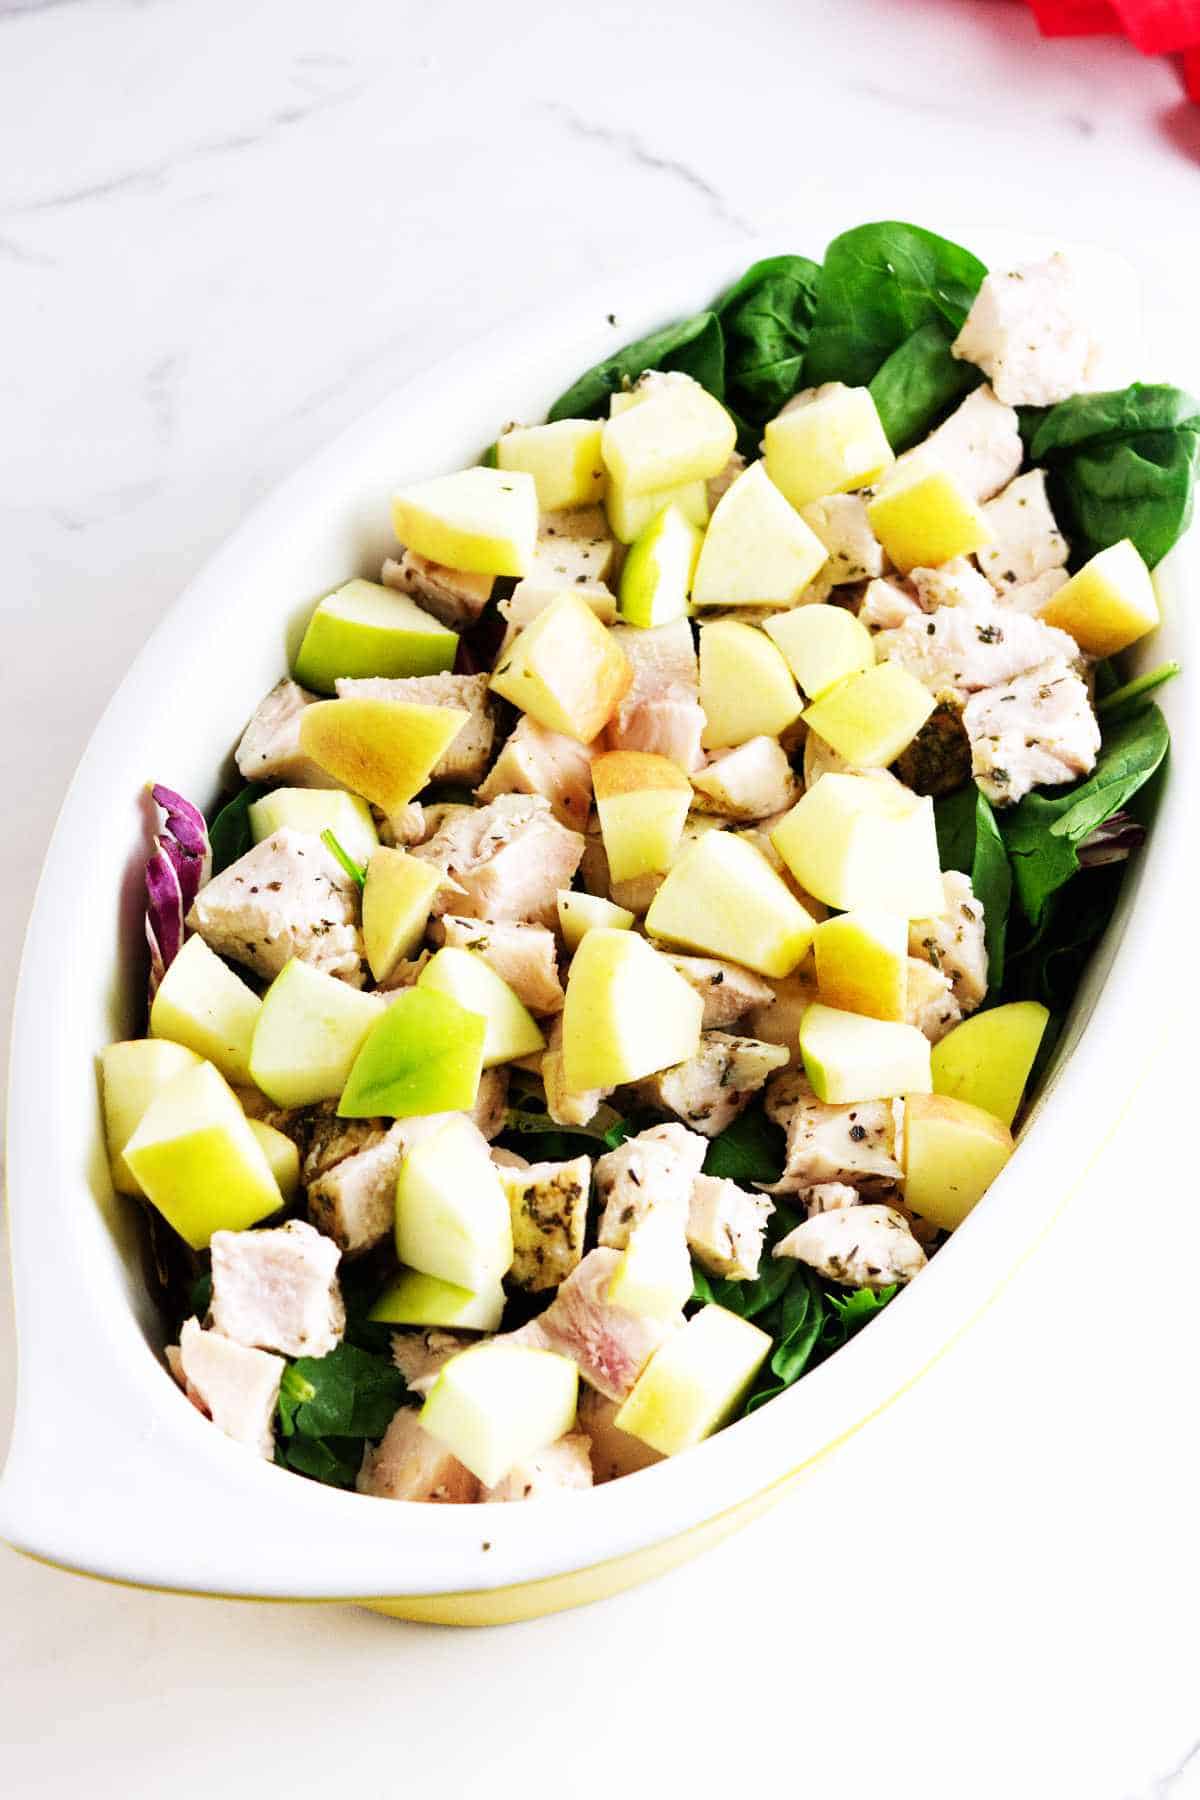 diced apples topping cubed chicken breast on a bed of salad greens.